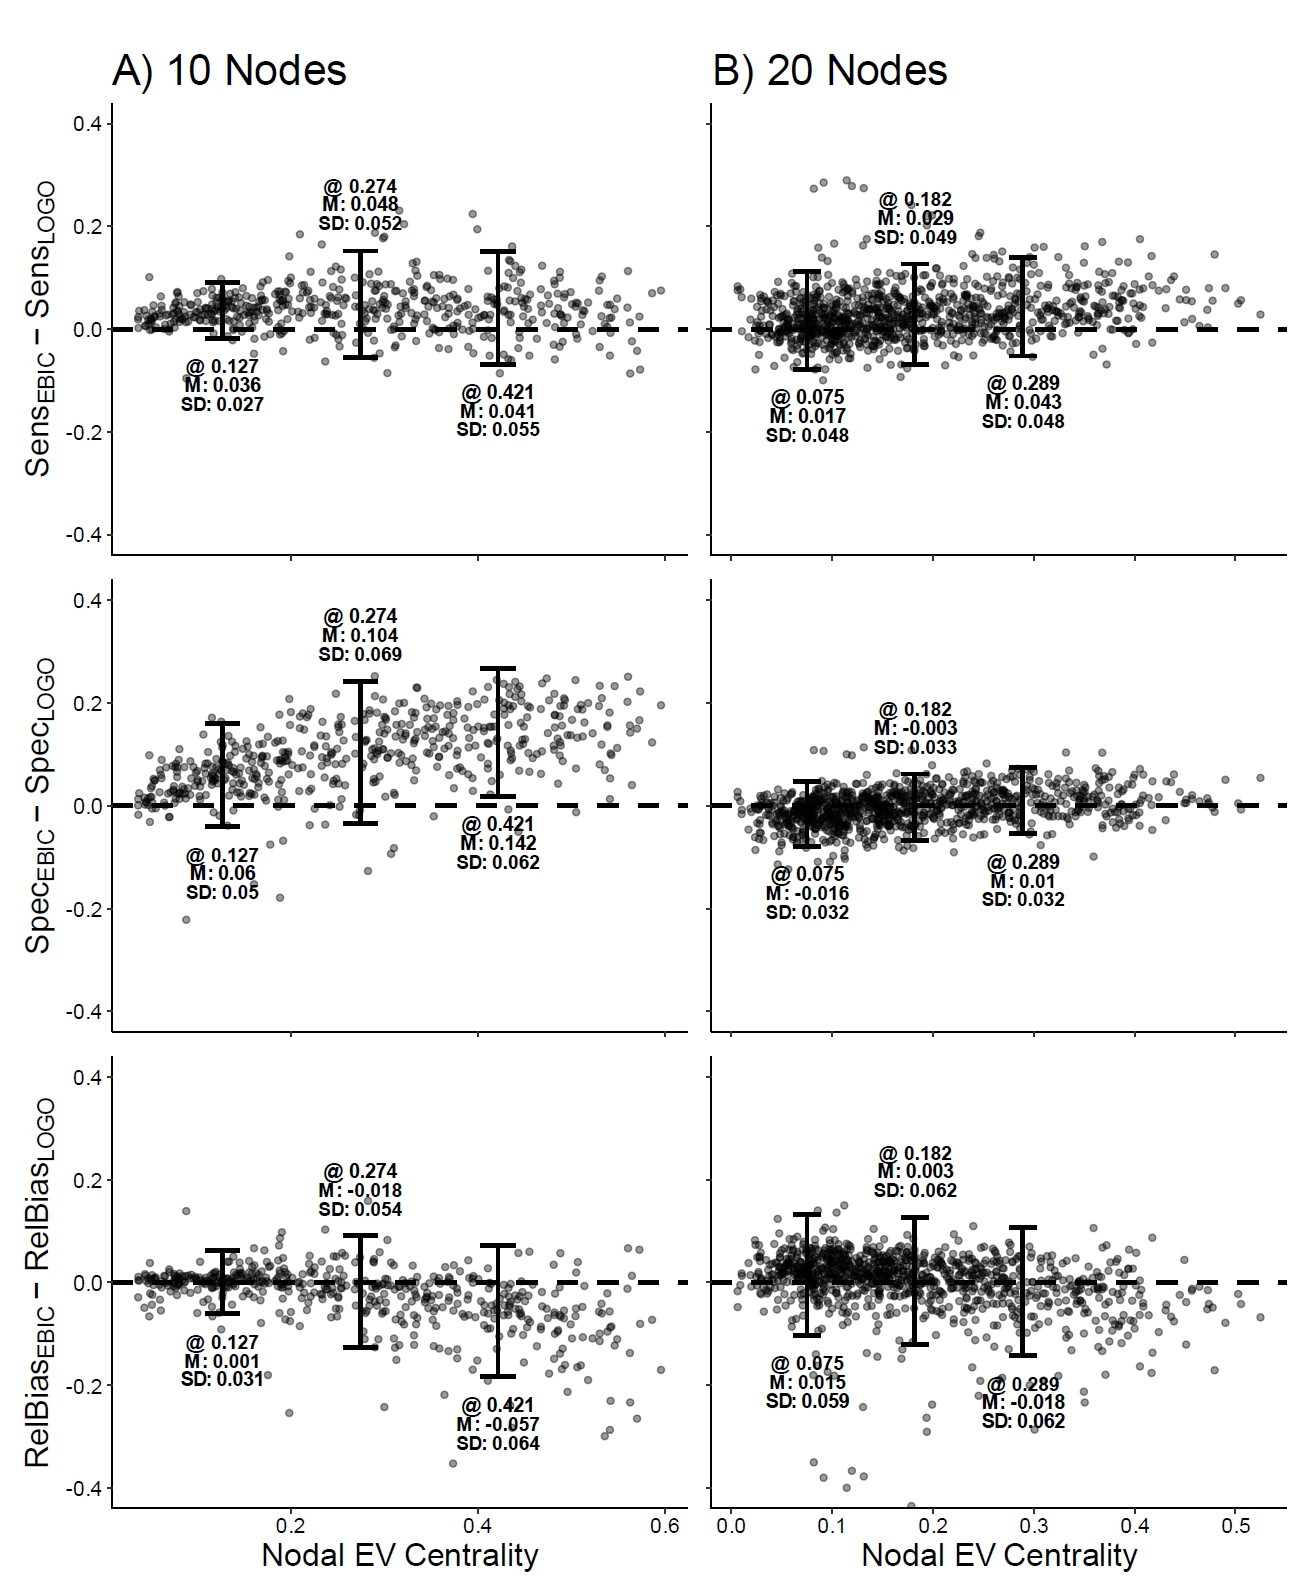 Bar graph comparing EBICglasso and LoGo-TMFG on sensitivity, specificity, and bias relative to eigenvector centrality of omitted variables, with interval bars and annotations for nodal eigenvector centrality values.